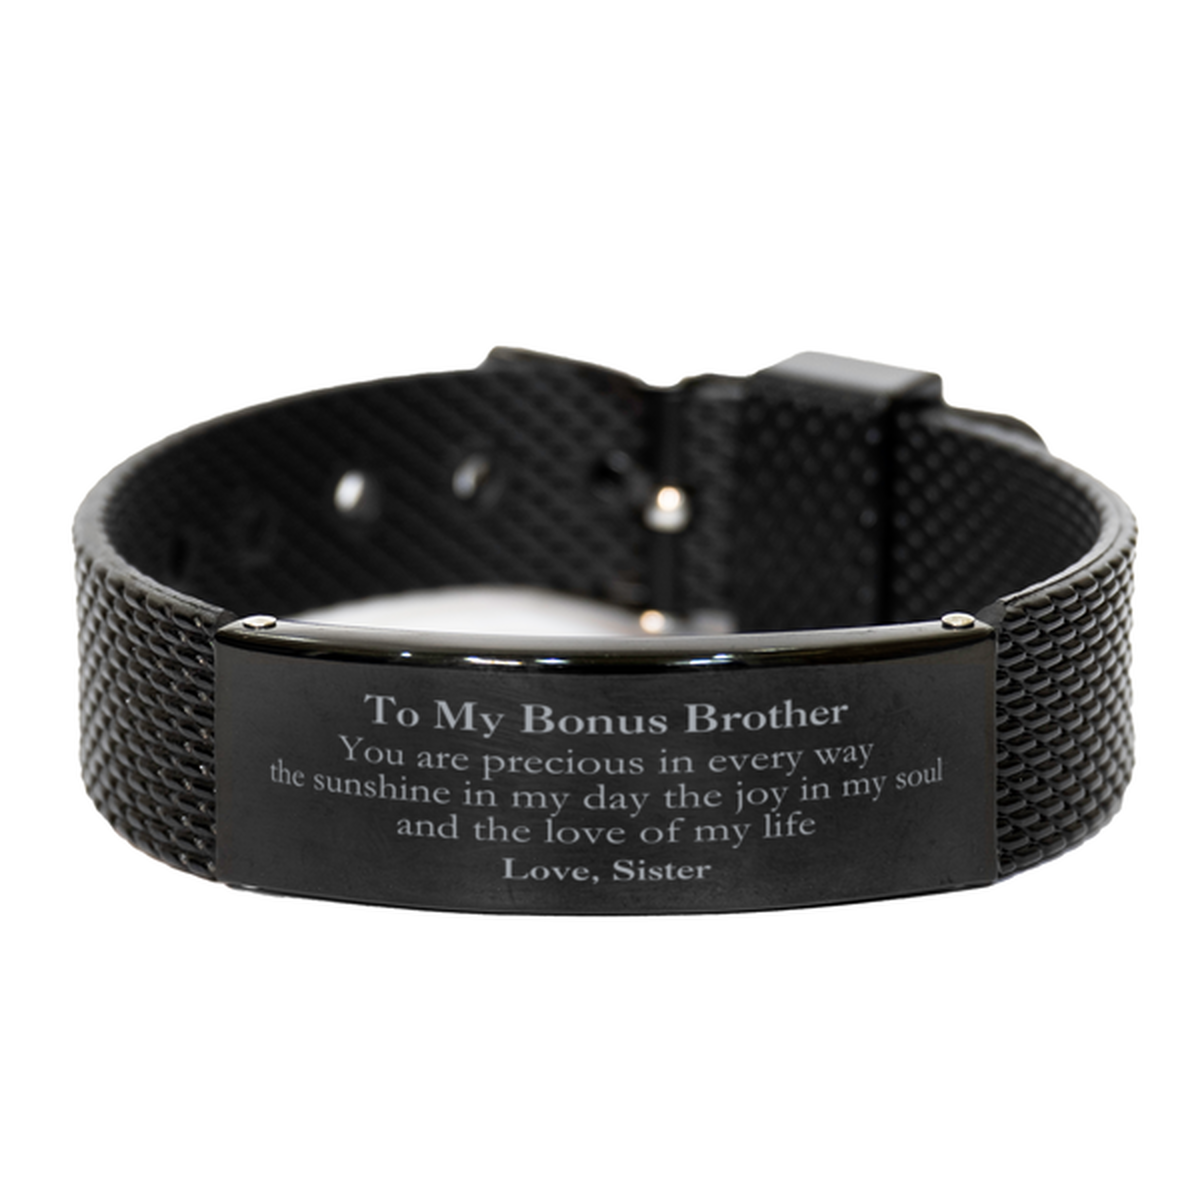 Graduation Gifts for Bonus Brother Black Shark Mesh Bracelet Present from Sister, Christmas Bonus Brother Birthday Gifts Bonus Brother You are precious in every way the sunshine in my day. Love, Sister